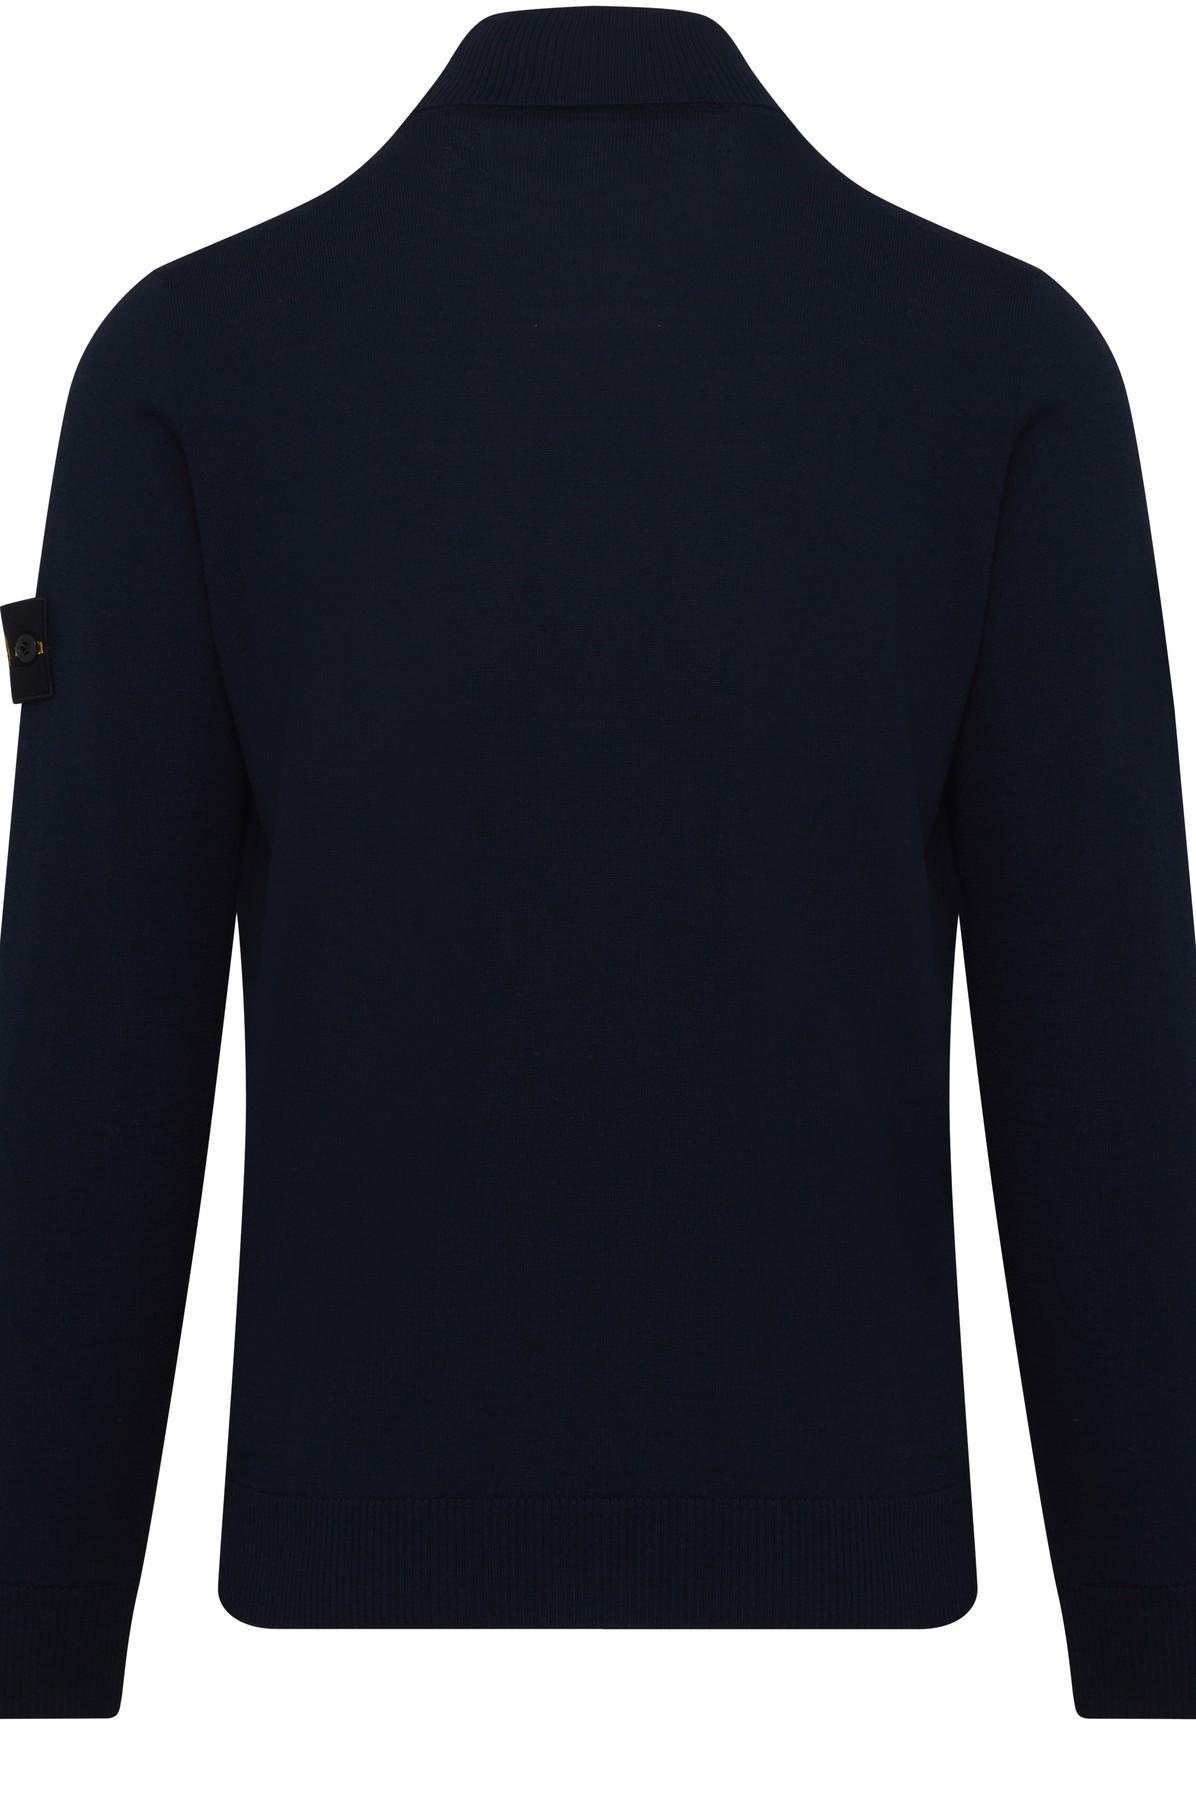 Mens Clothing Sweaters and knitwear Turtlenecks for Men Stone Island Wool Turtleneck Sweater With Logo in Black Blue 